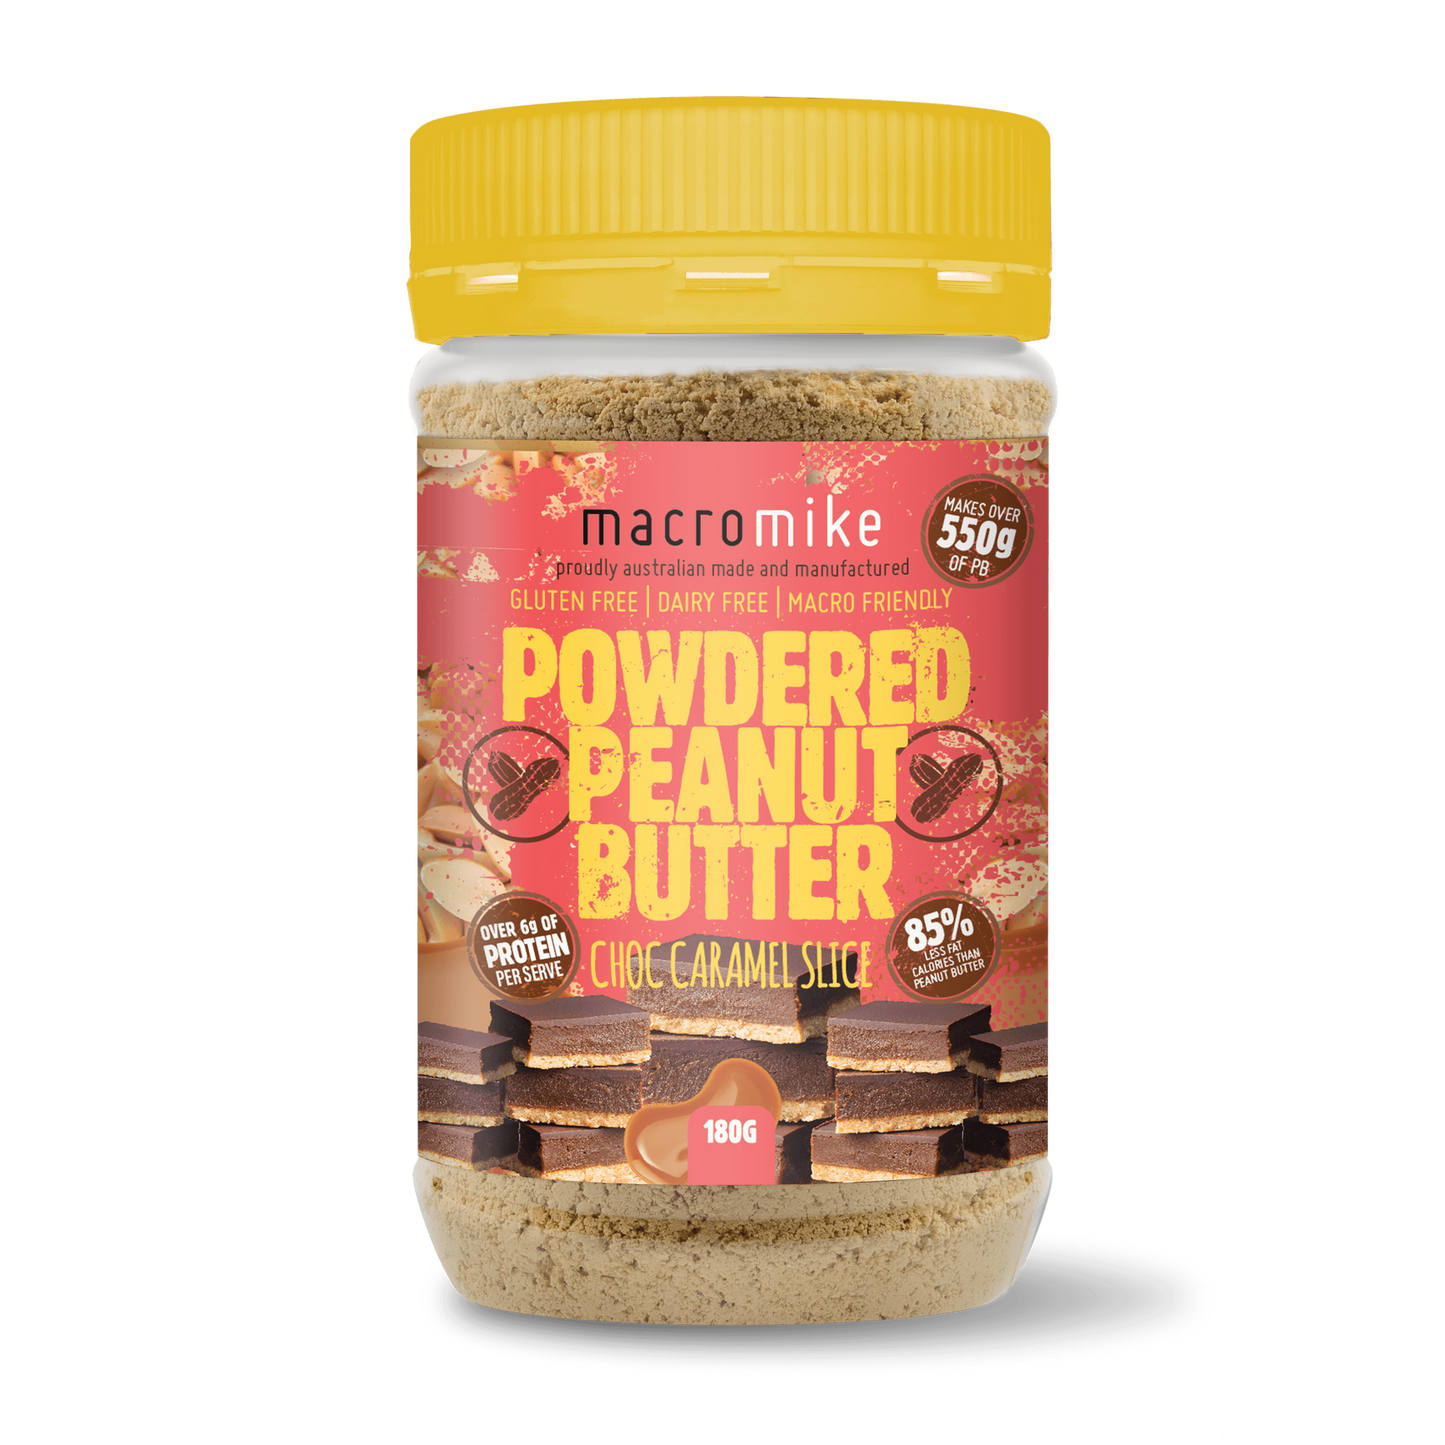 Macro Mike Powdered Peanut Butter 180g, Chocolate Caramel Slice Flavour